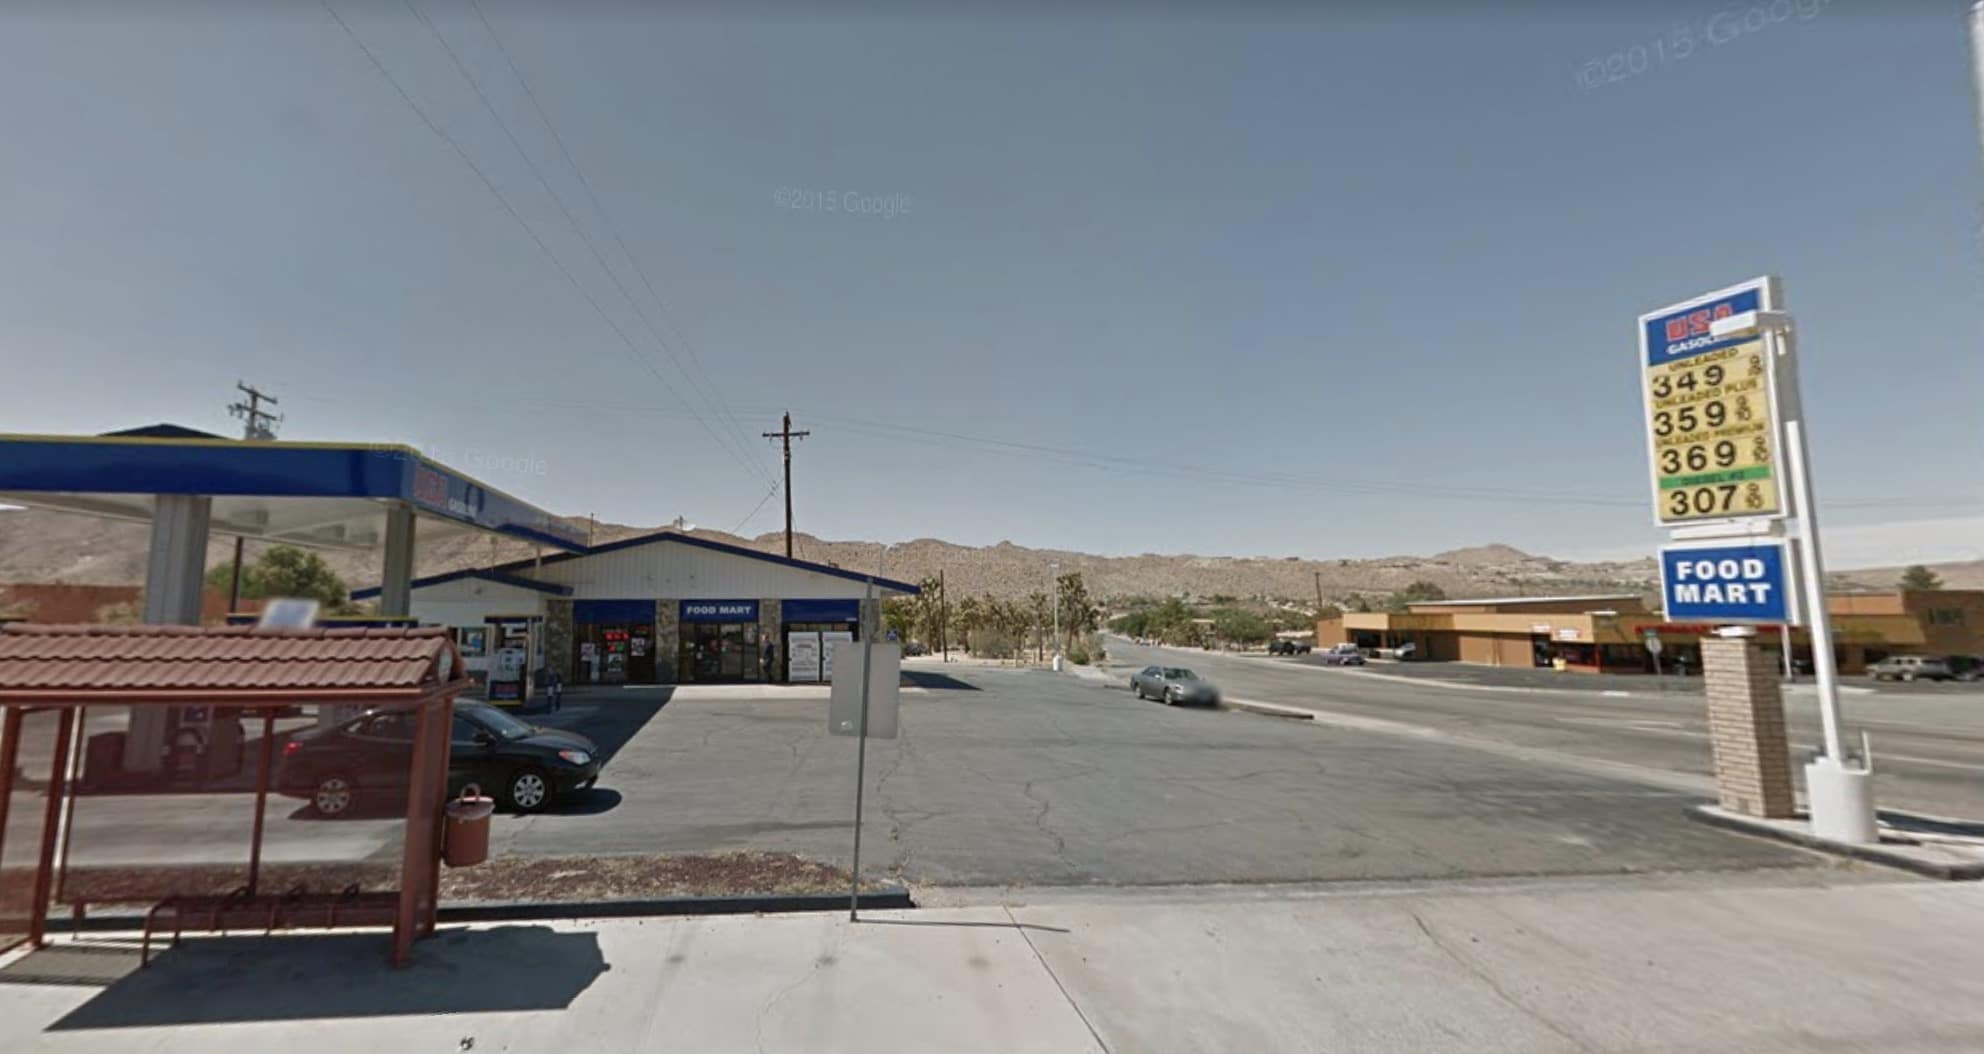 1 dead, 1 injured following shooting in Yucca Valley | Cactus Hugs